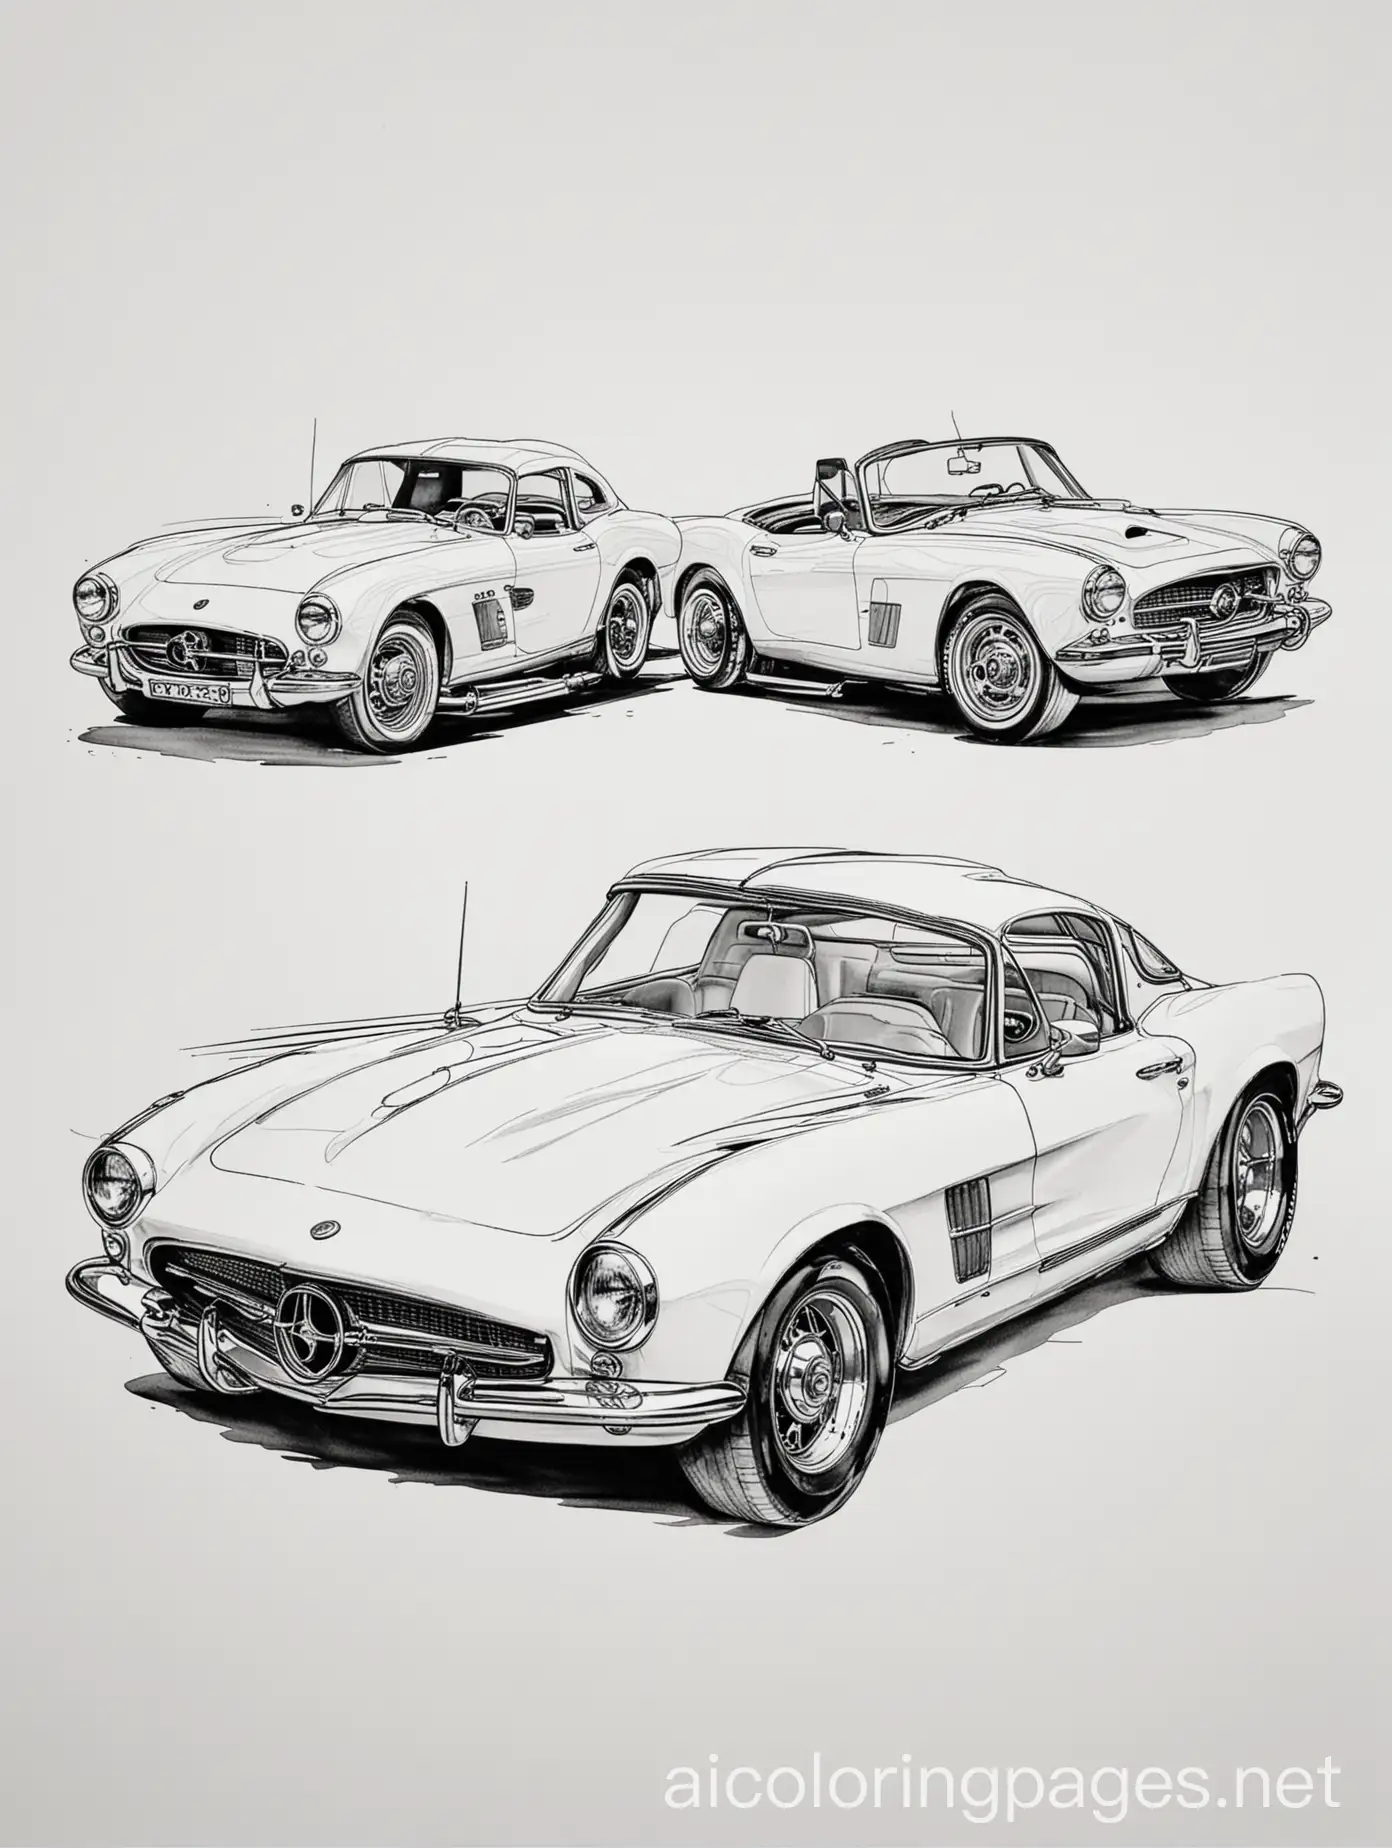 Cars, Coloring Page, black and white, line art, white background, Simplicity, Ample White Space. The background of the coloring page is plain white to make it easy for young children to color within the lines. The outlines of all the subjects are easy to distinguish, making it simple for kids to color without too much difficulty